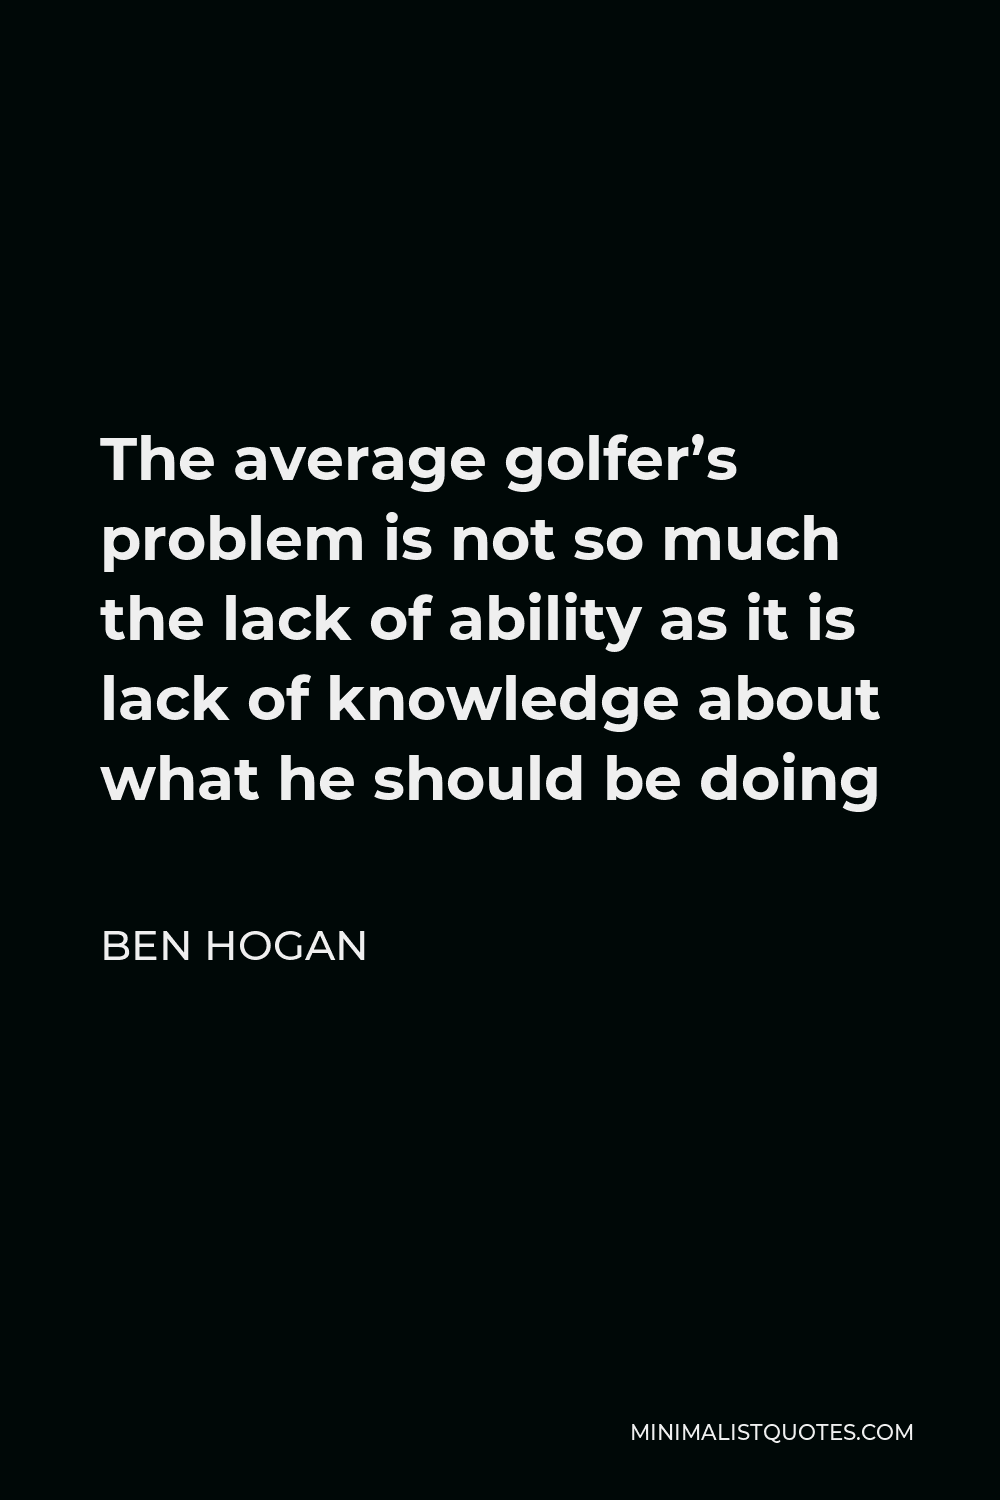 Ben Hogan Quote - The average golfer’s problem is not so much the lack of ability as it is lack of knowledge about what he should be doing